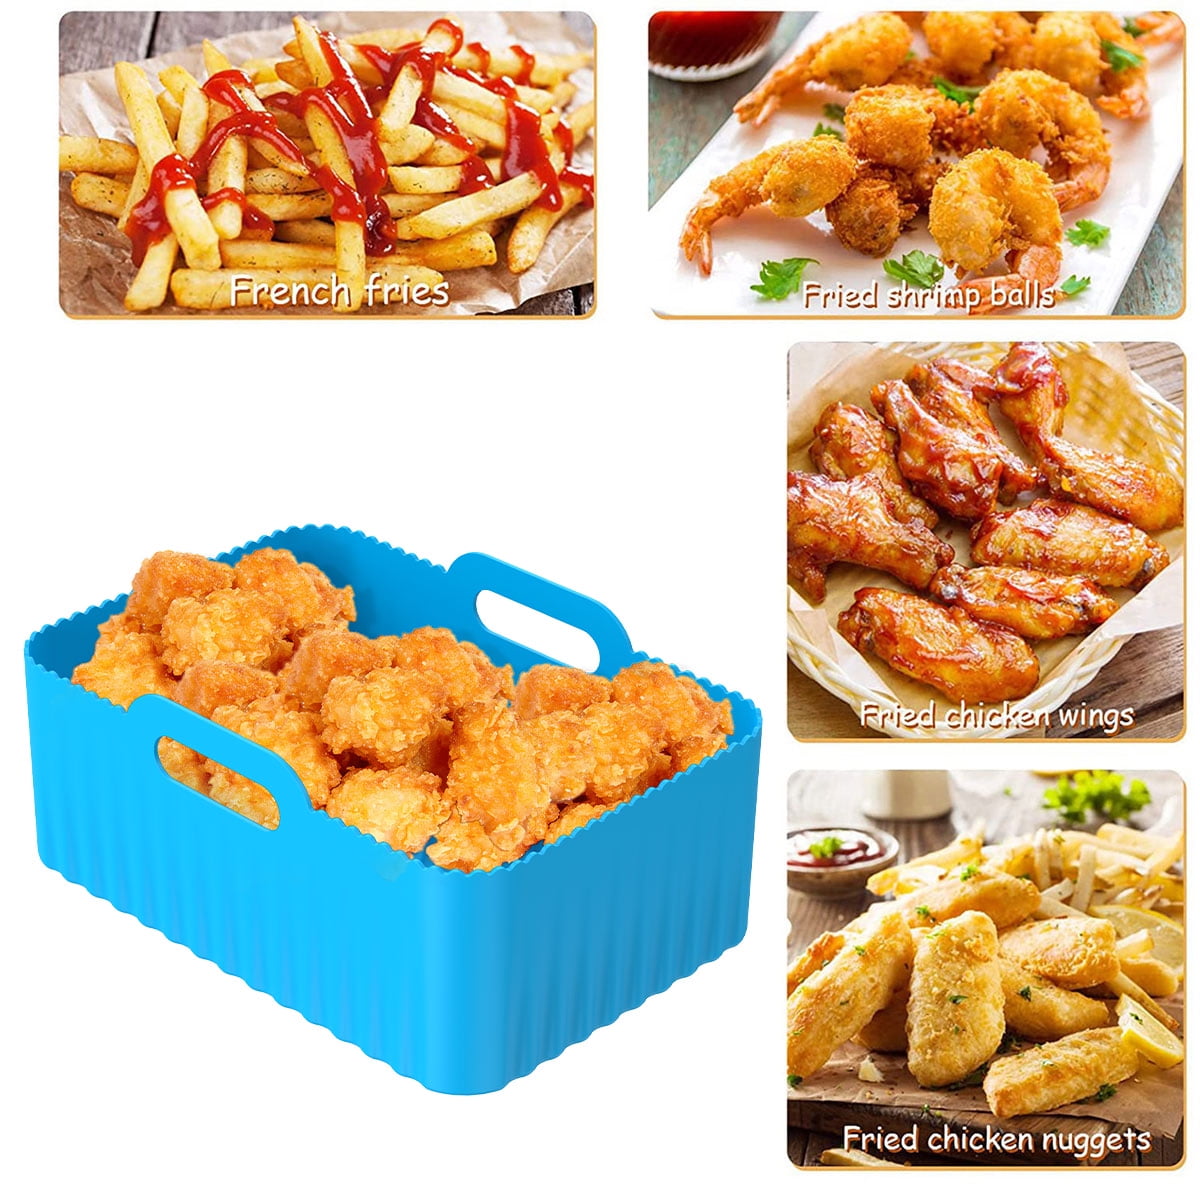 MMH Silicone Liners Rectangular 2 Pcs for 10 Qt Air Fryer Dual